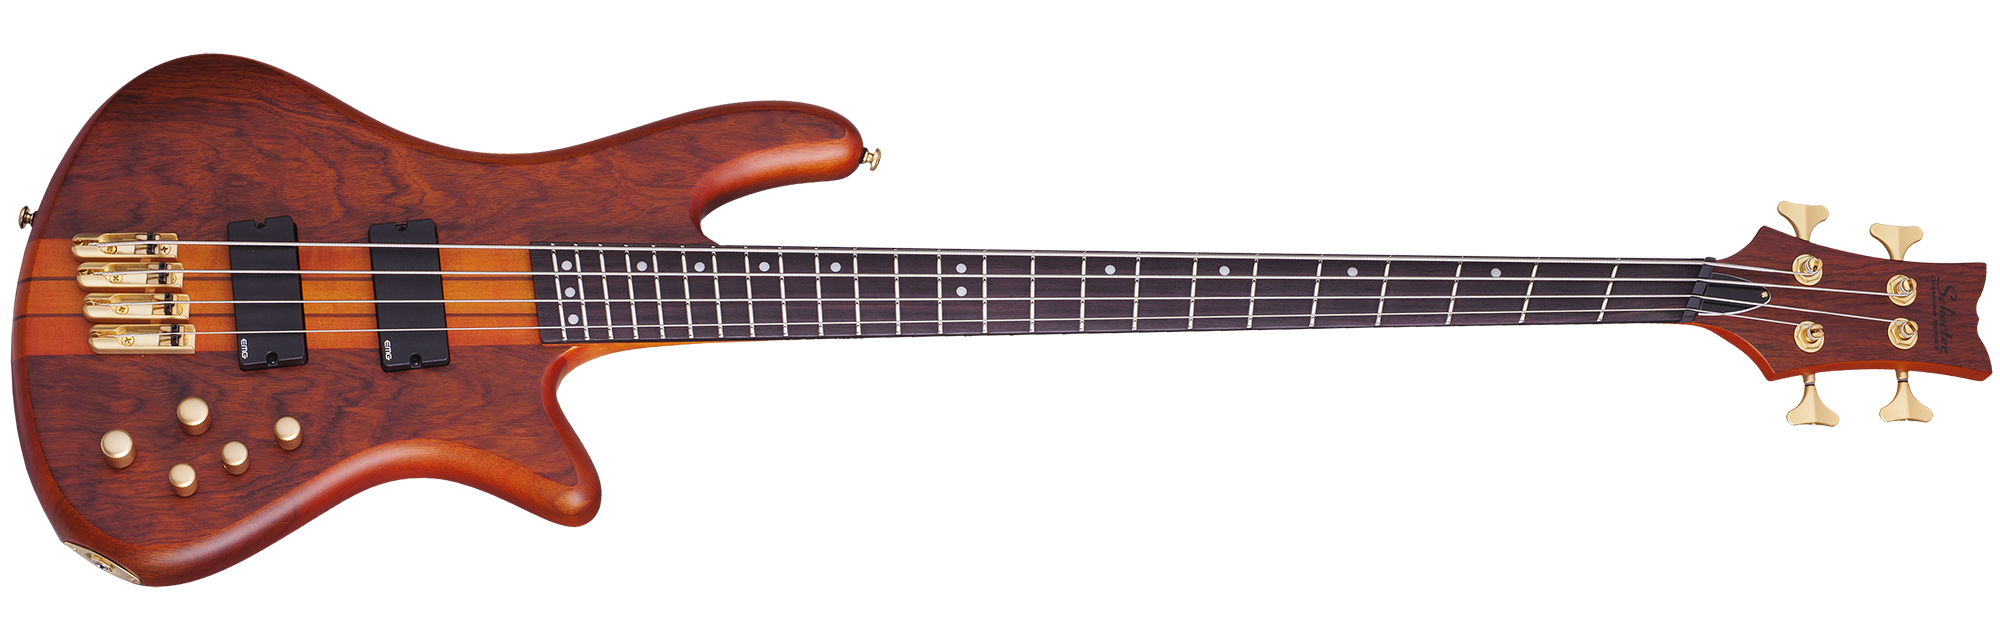 Schecter 4-String Fanned Fret Bass Guitar Honey Stain w/ Geartree Cloth and Hard Case 2793 - The Guitar World